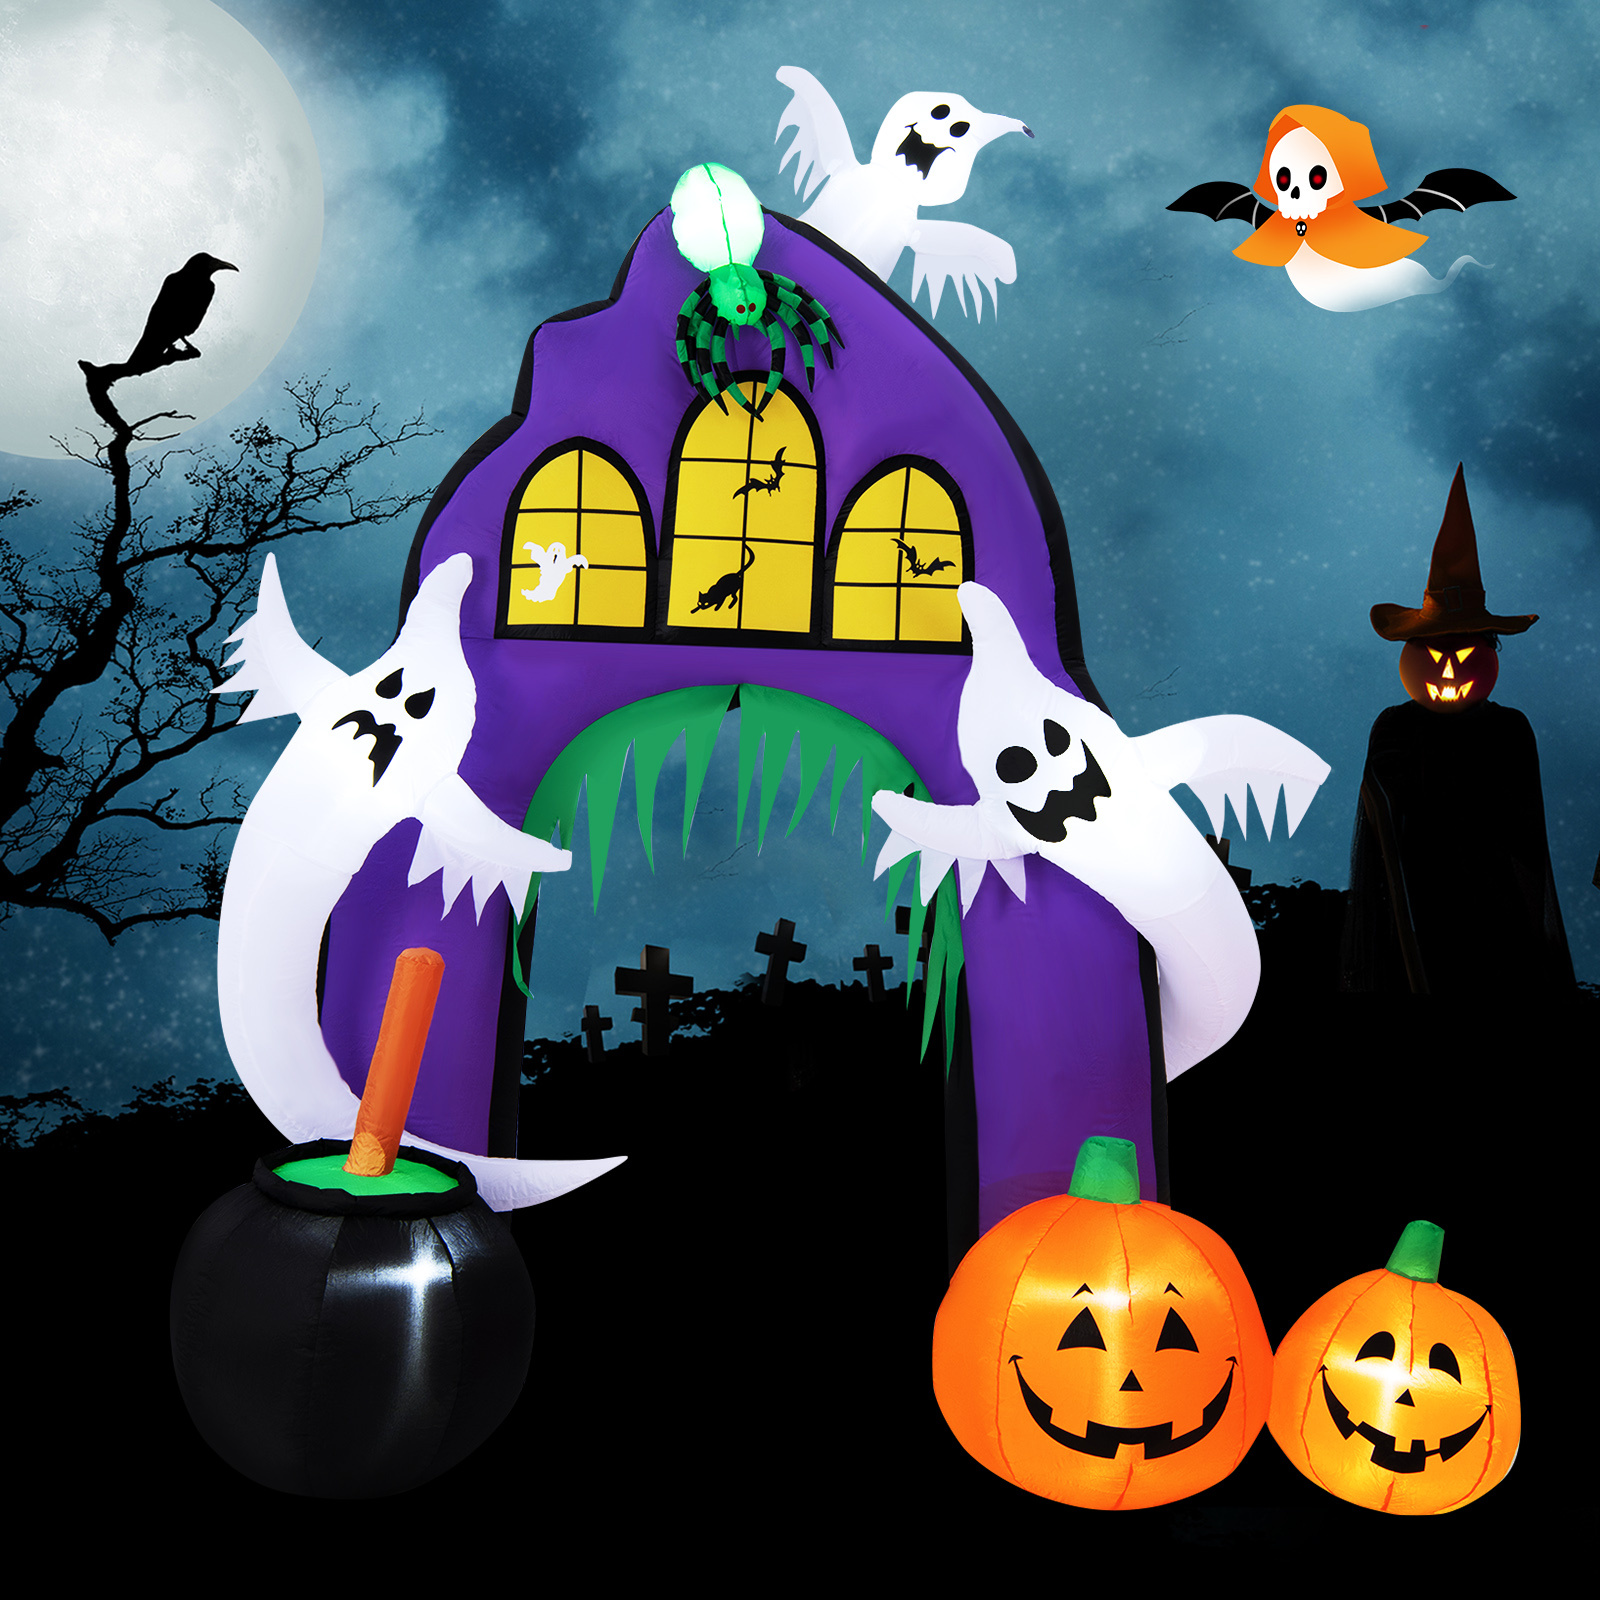 

Lifezeal 9 Ft Tall Halloween Inflatable Castle Archway Decor W/spider Ghosts &built-in Lights